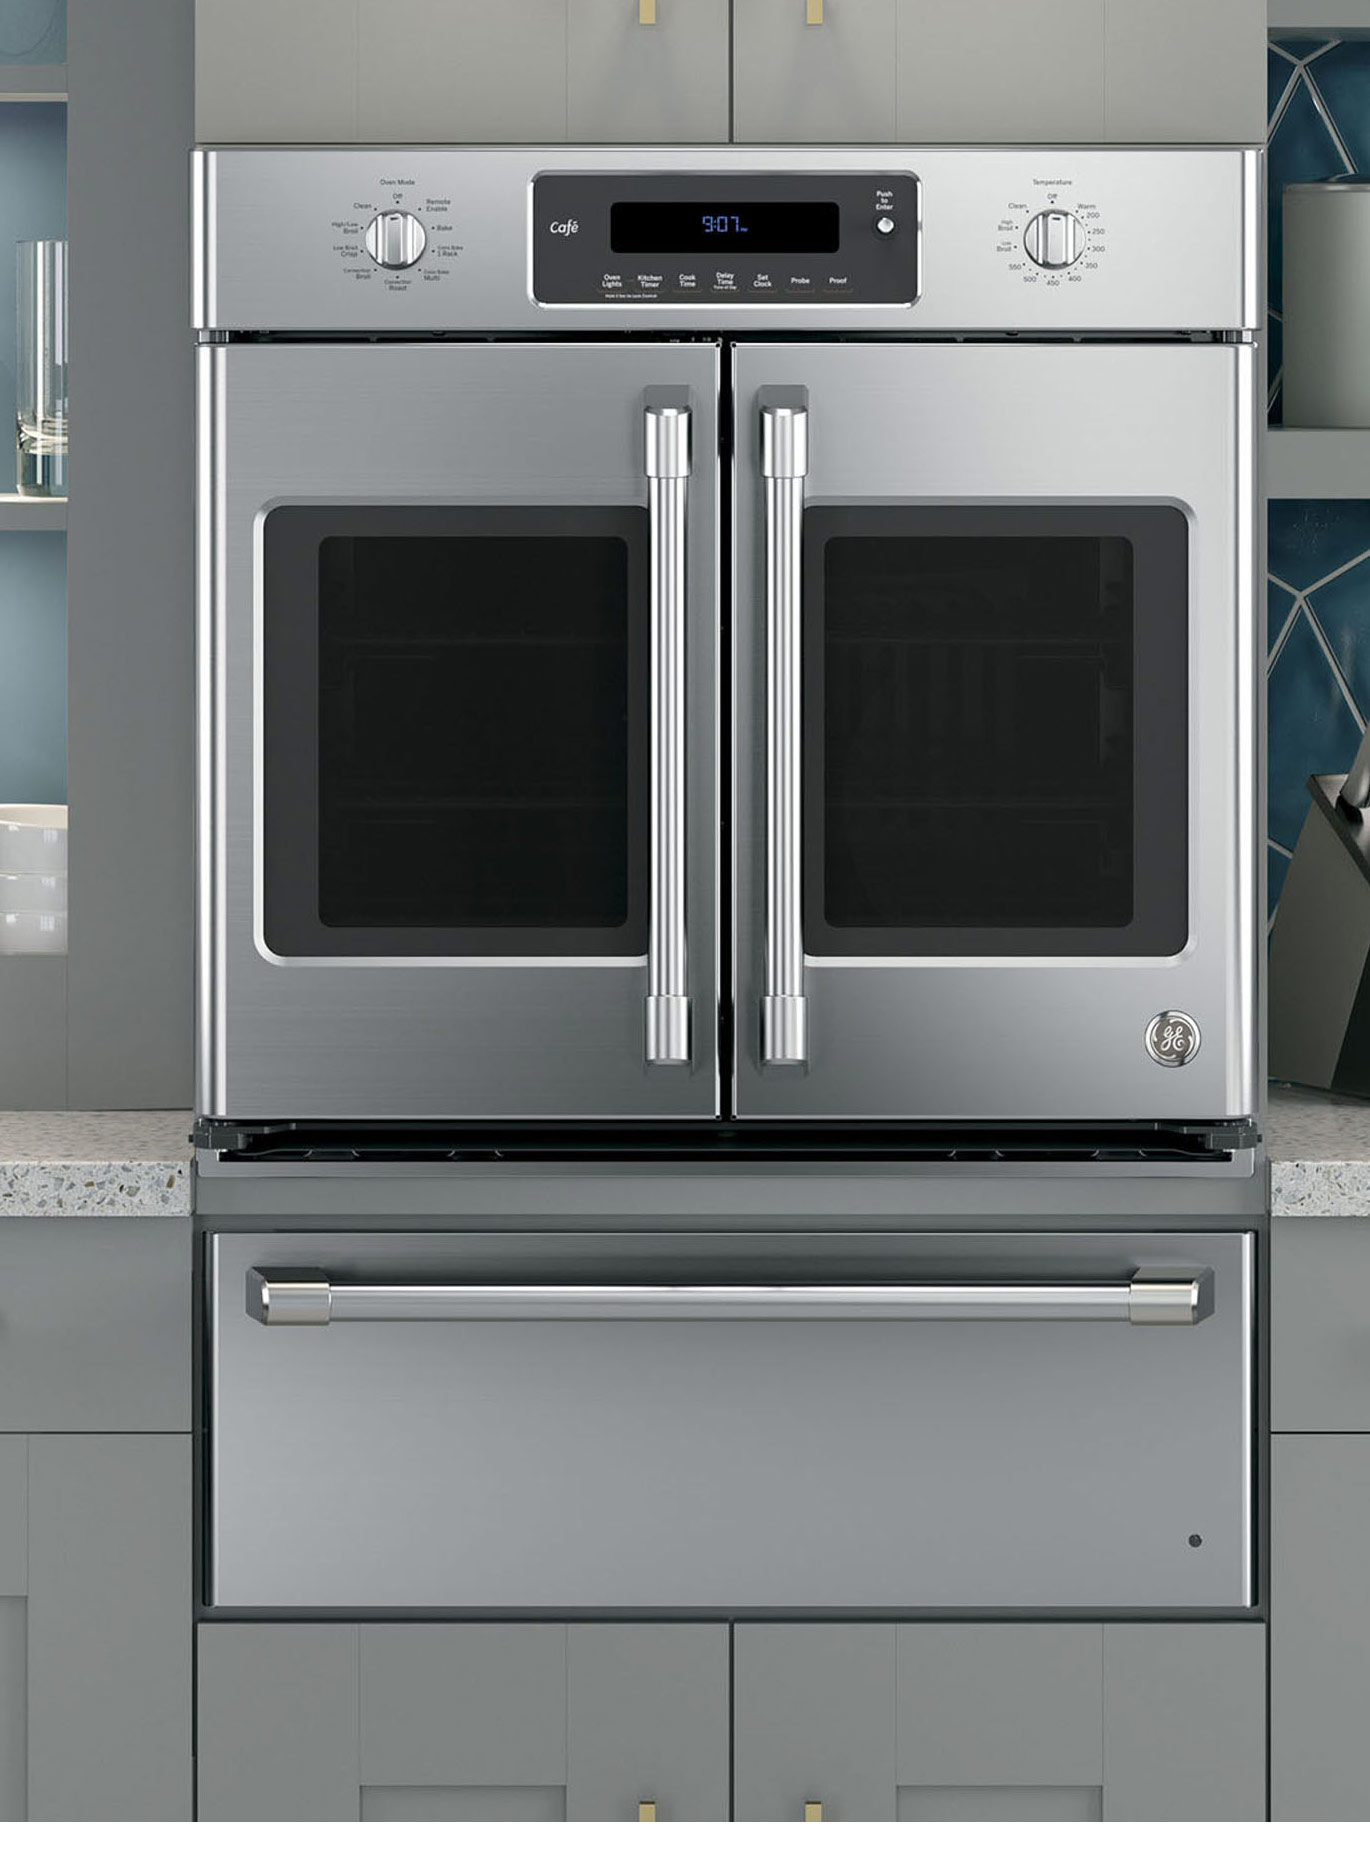 GE Appliances launches all new wall and range line-up